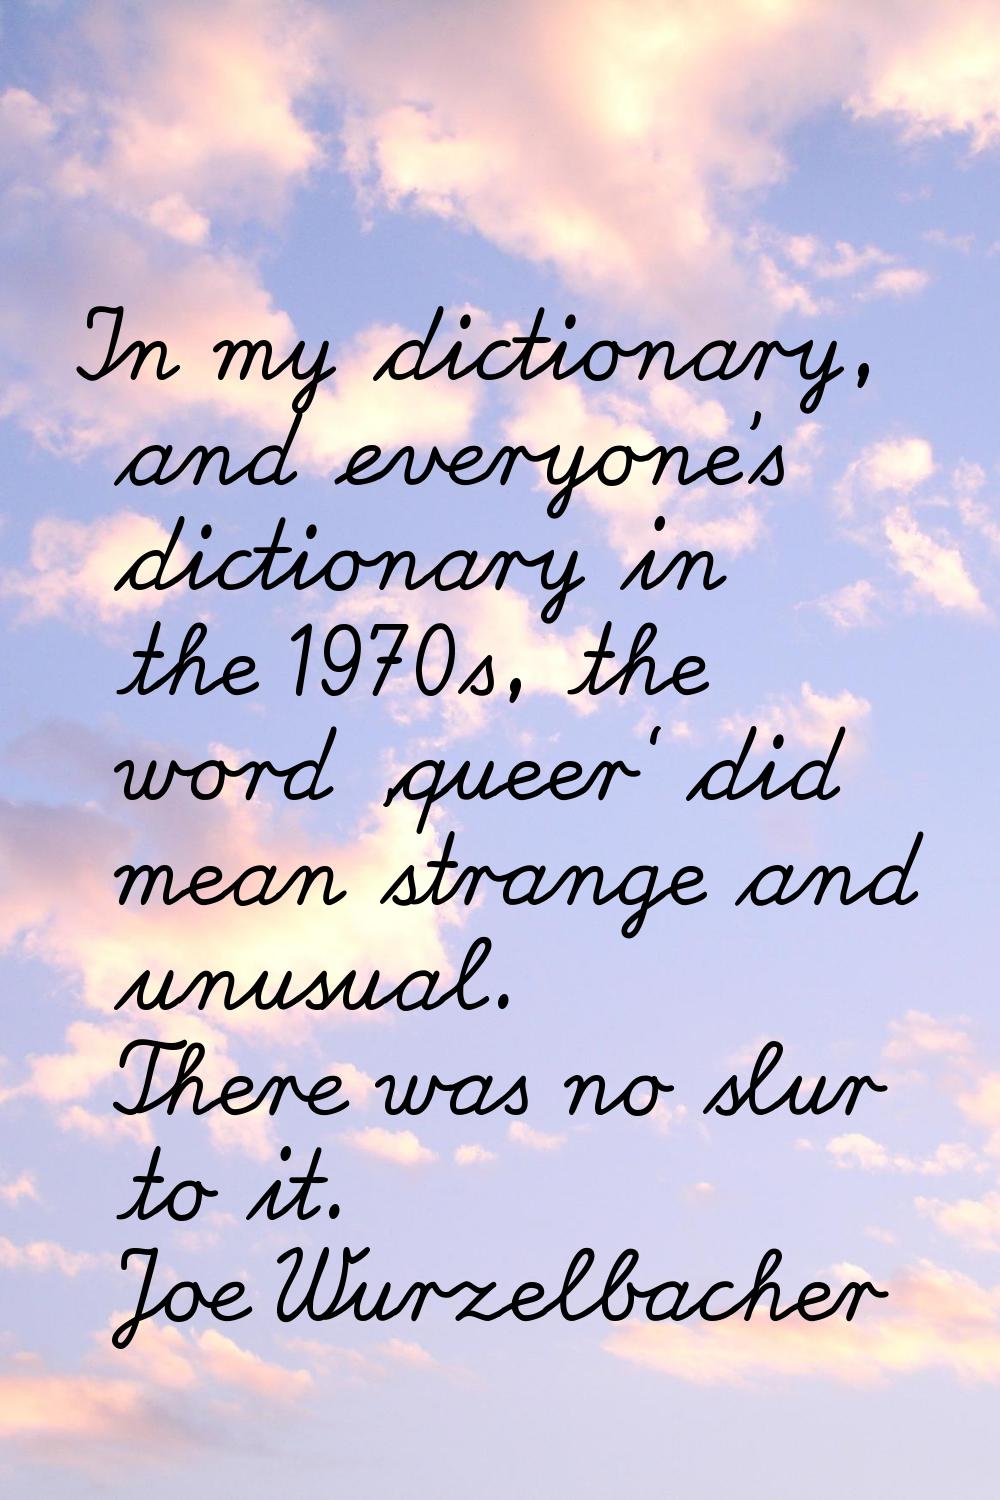 In my dictionary, and everyone's dictionary in the 1970s, the word 'queer' did mean strange and unu